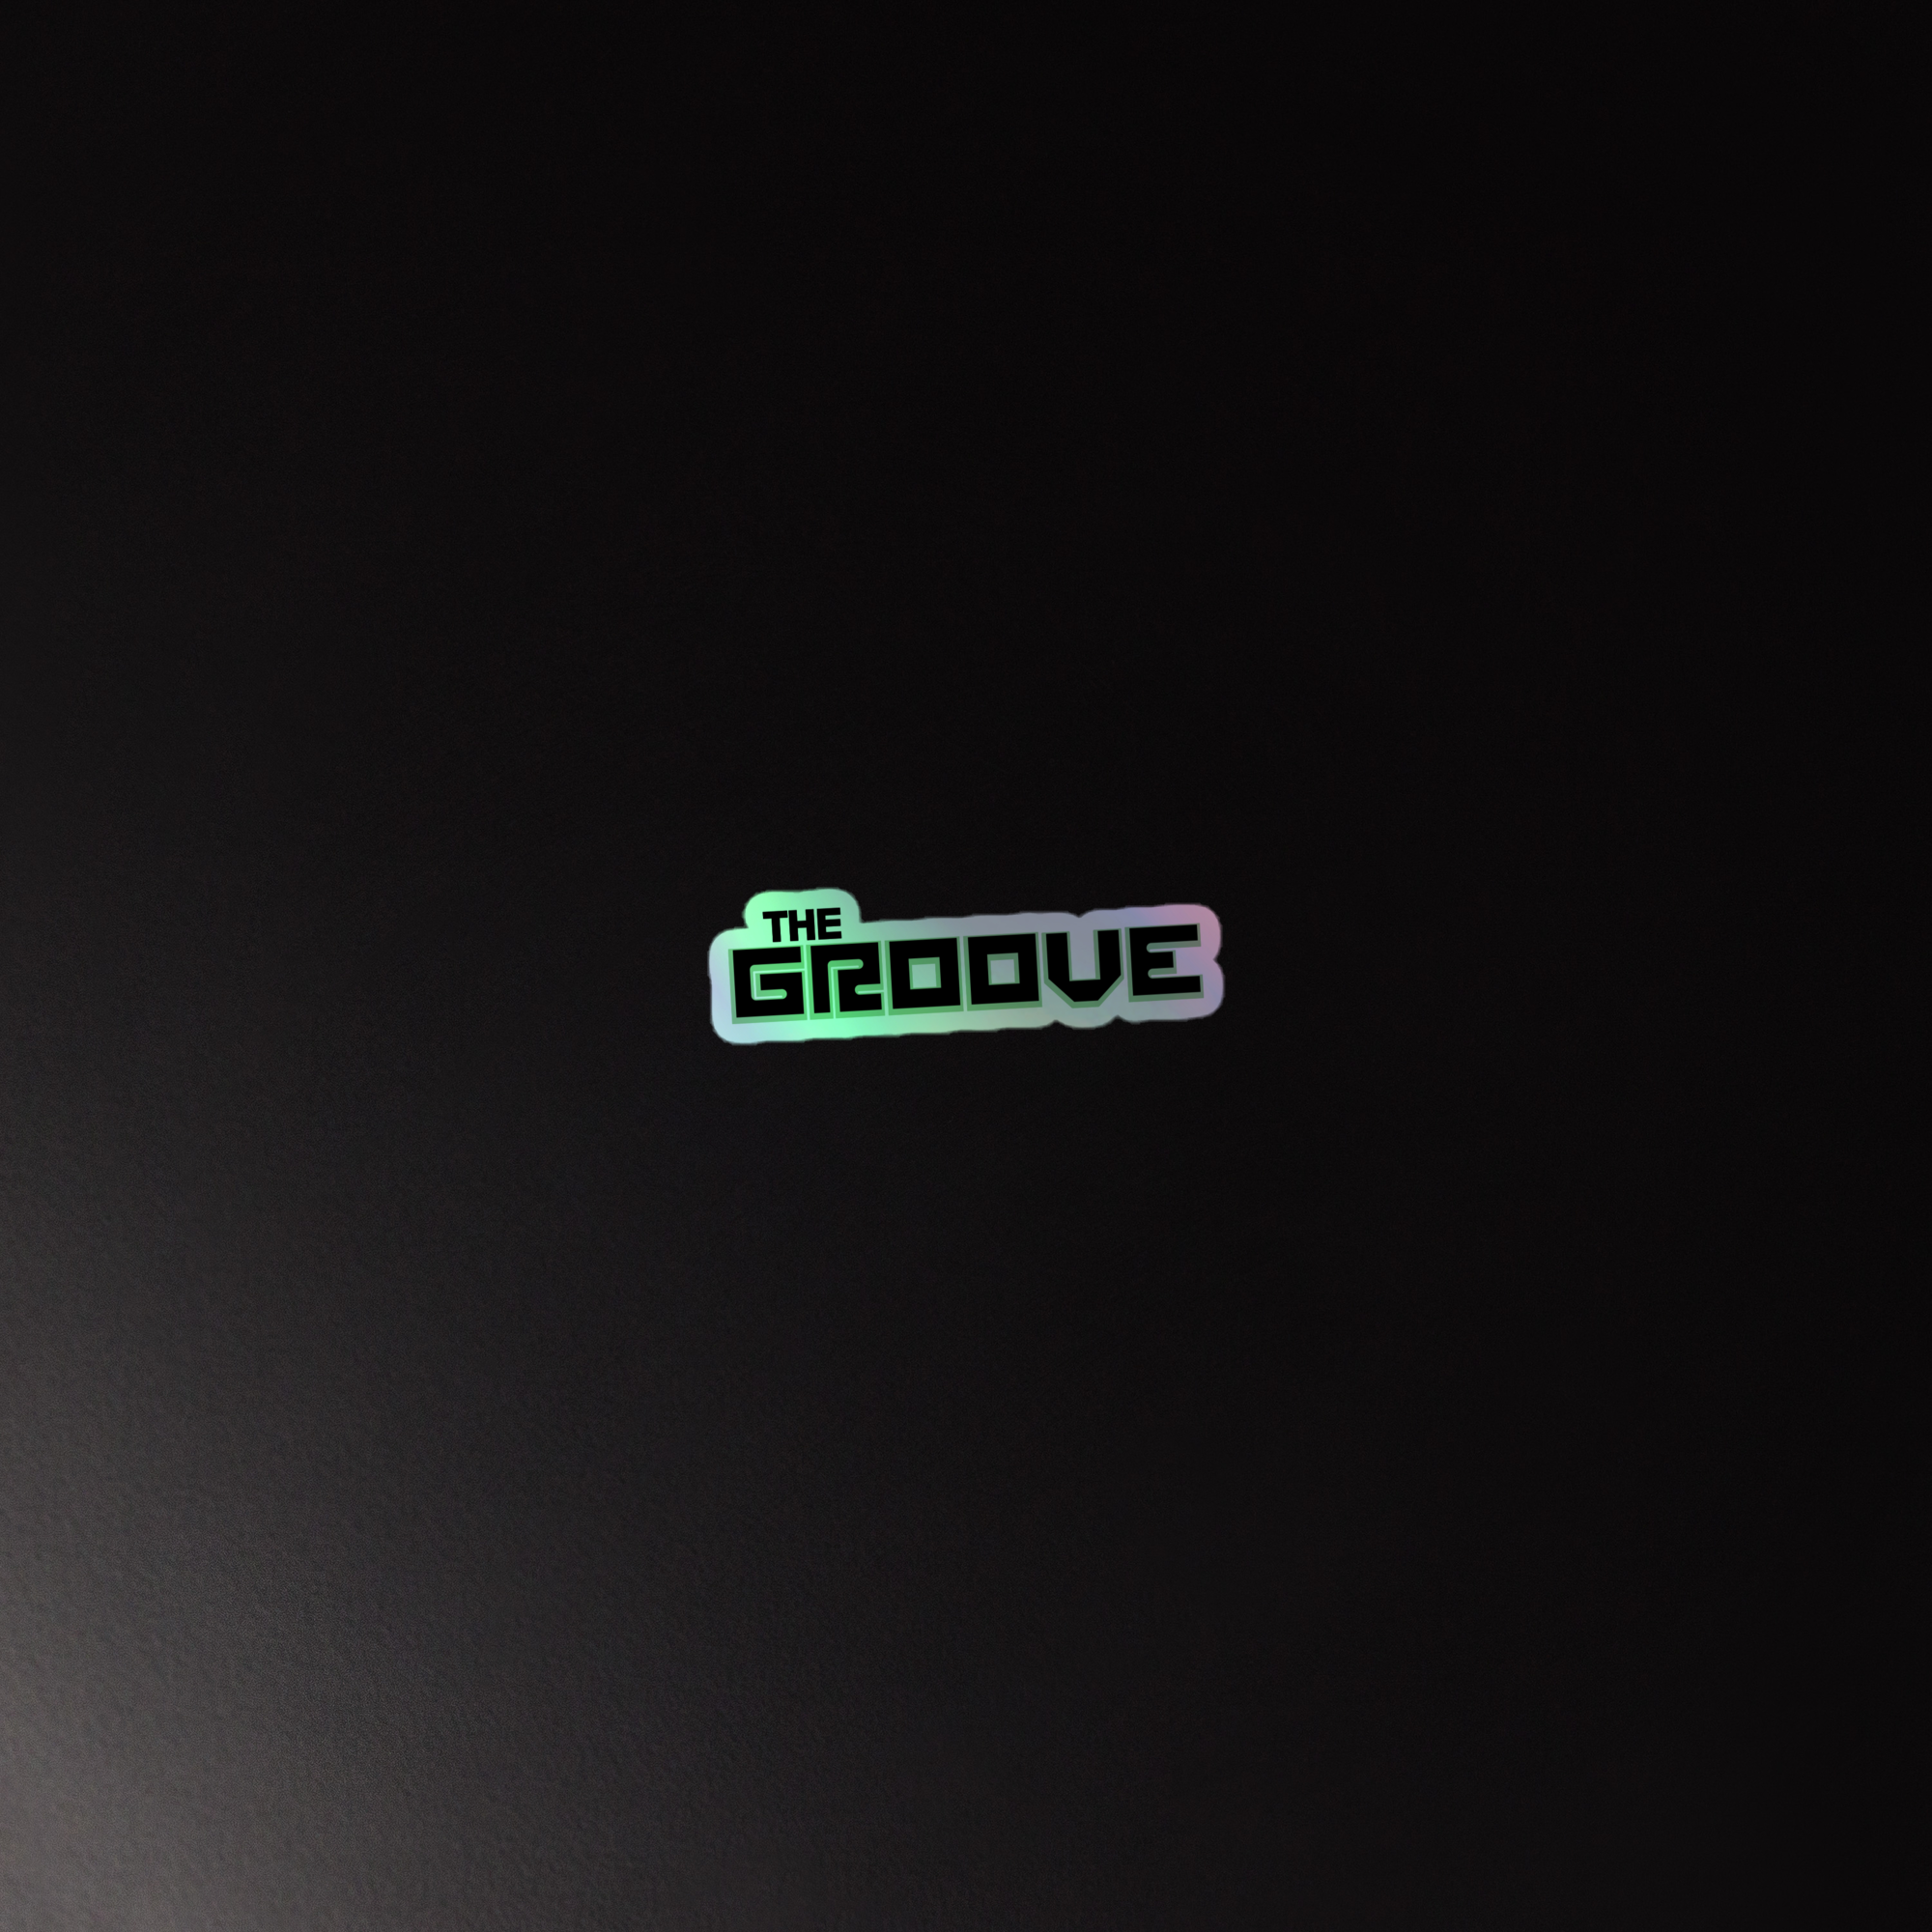 The Groove: Holographic Sticker